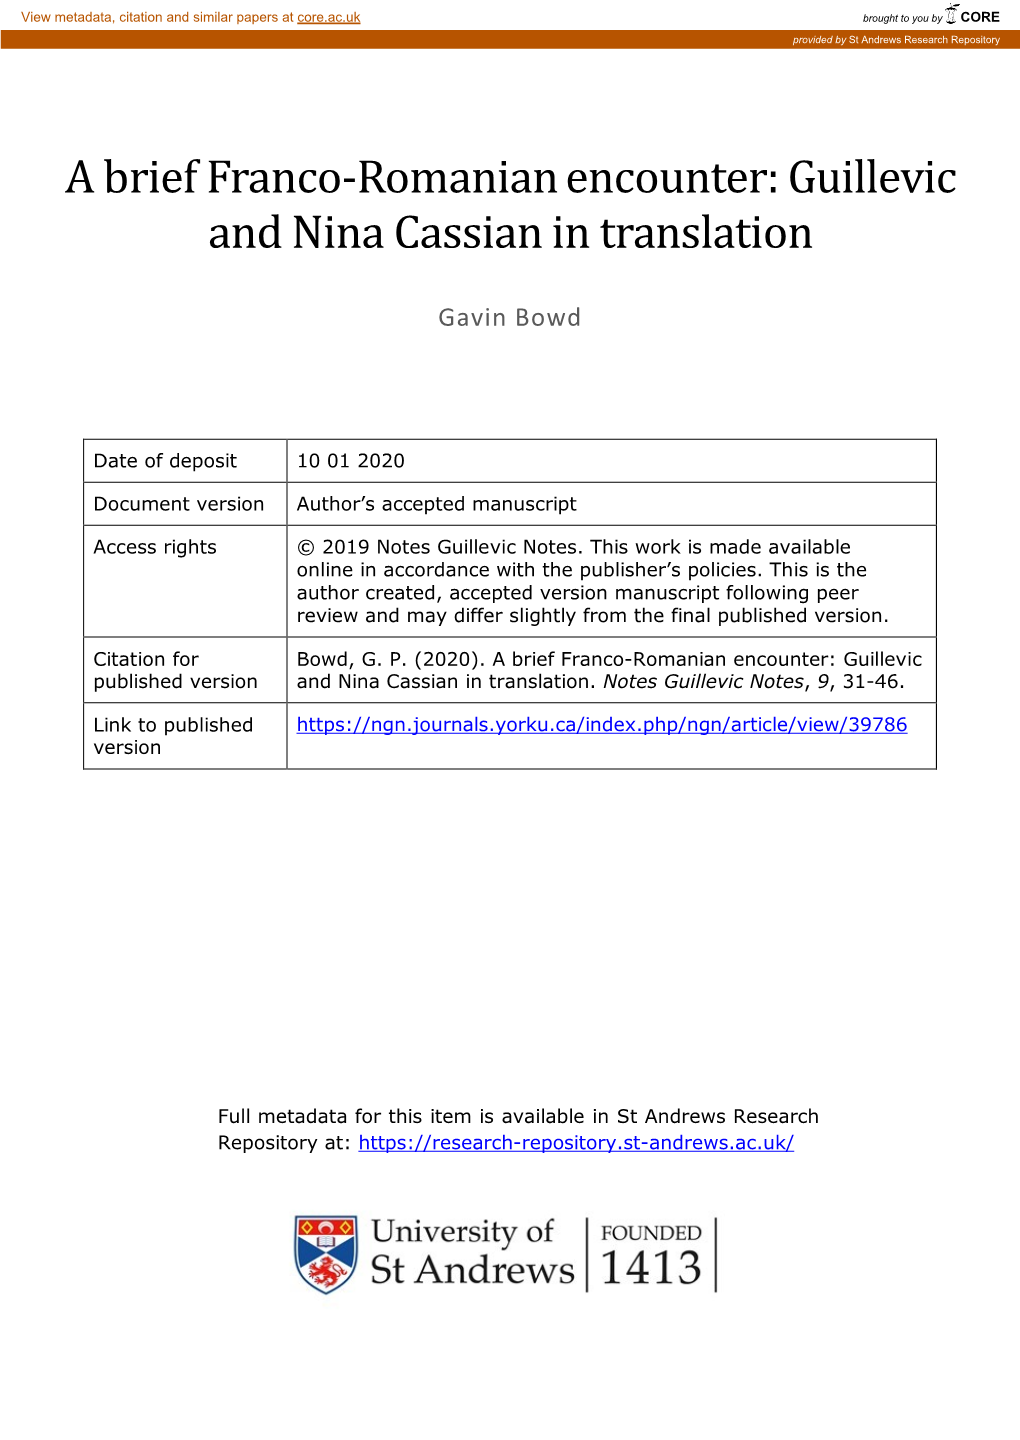 Guillevic and Nina Cassian in Translation